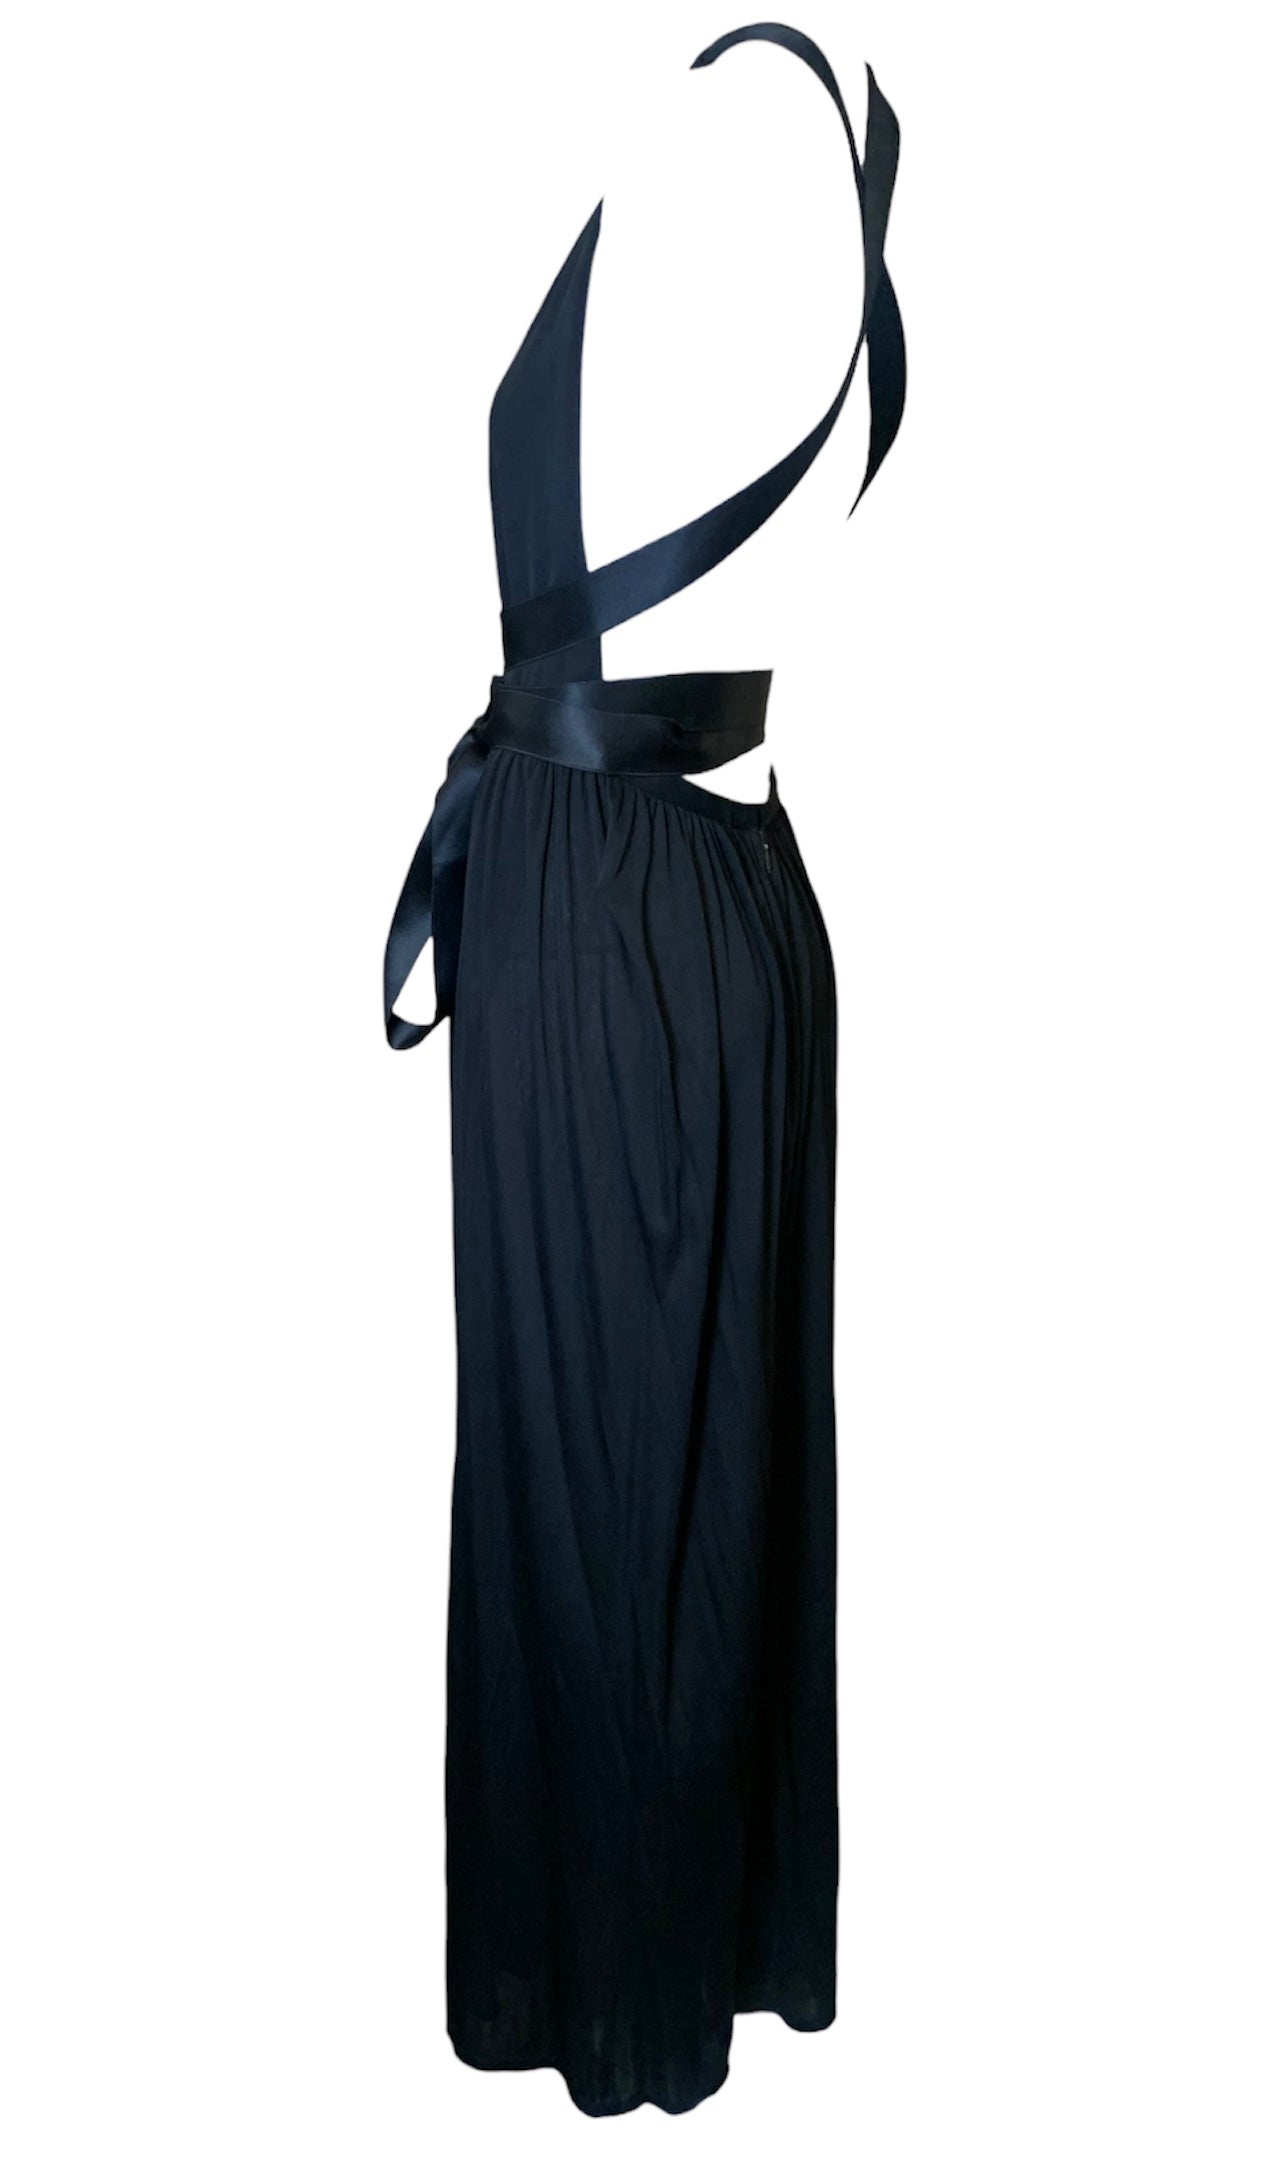 Donald Brooks '70s Black Jersey Halter Gown with Satin Ties SIDE 2/6